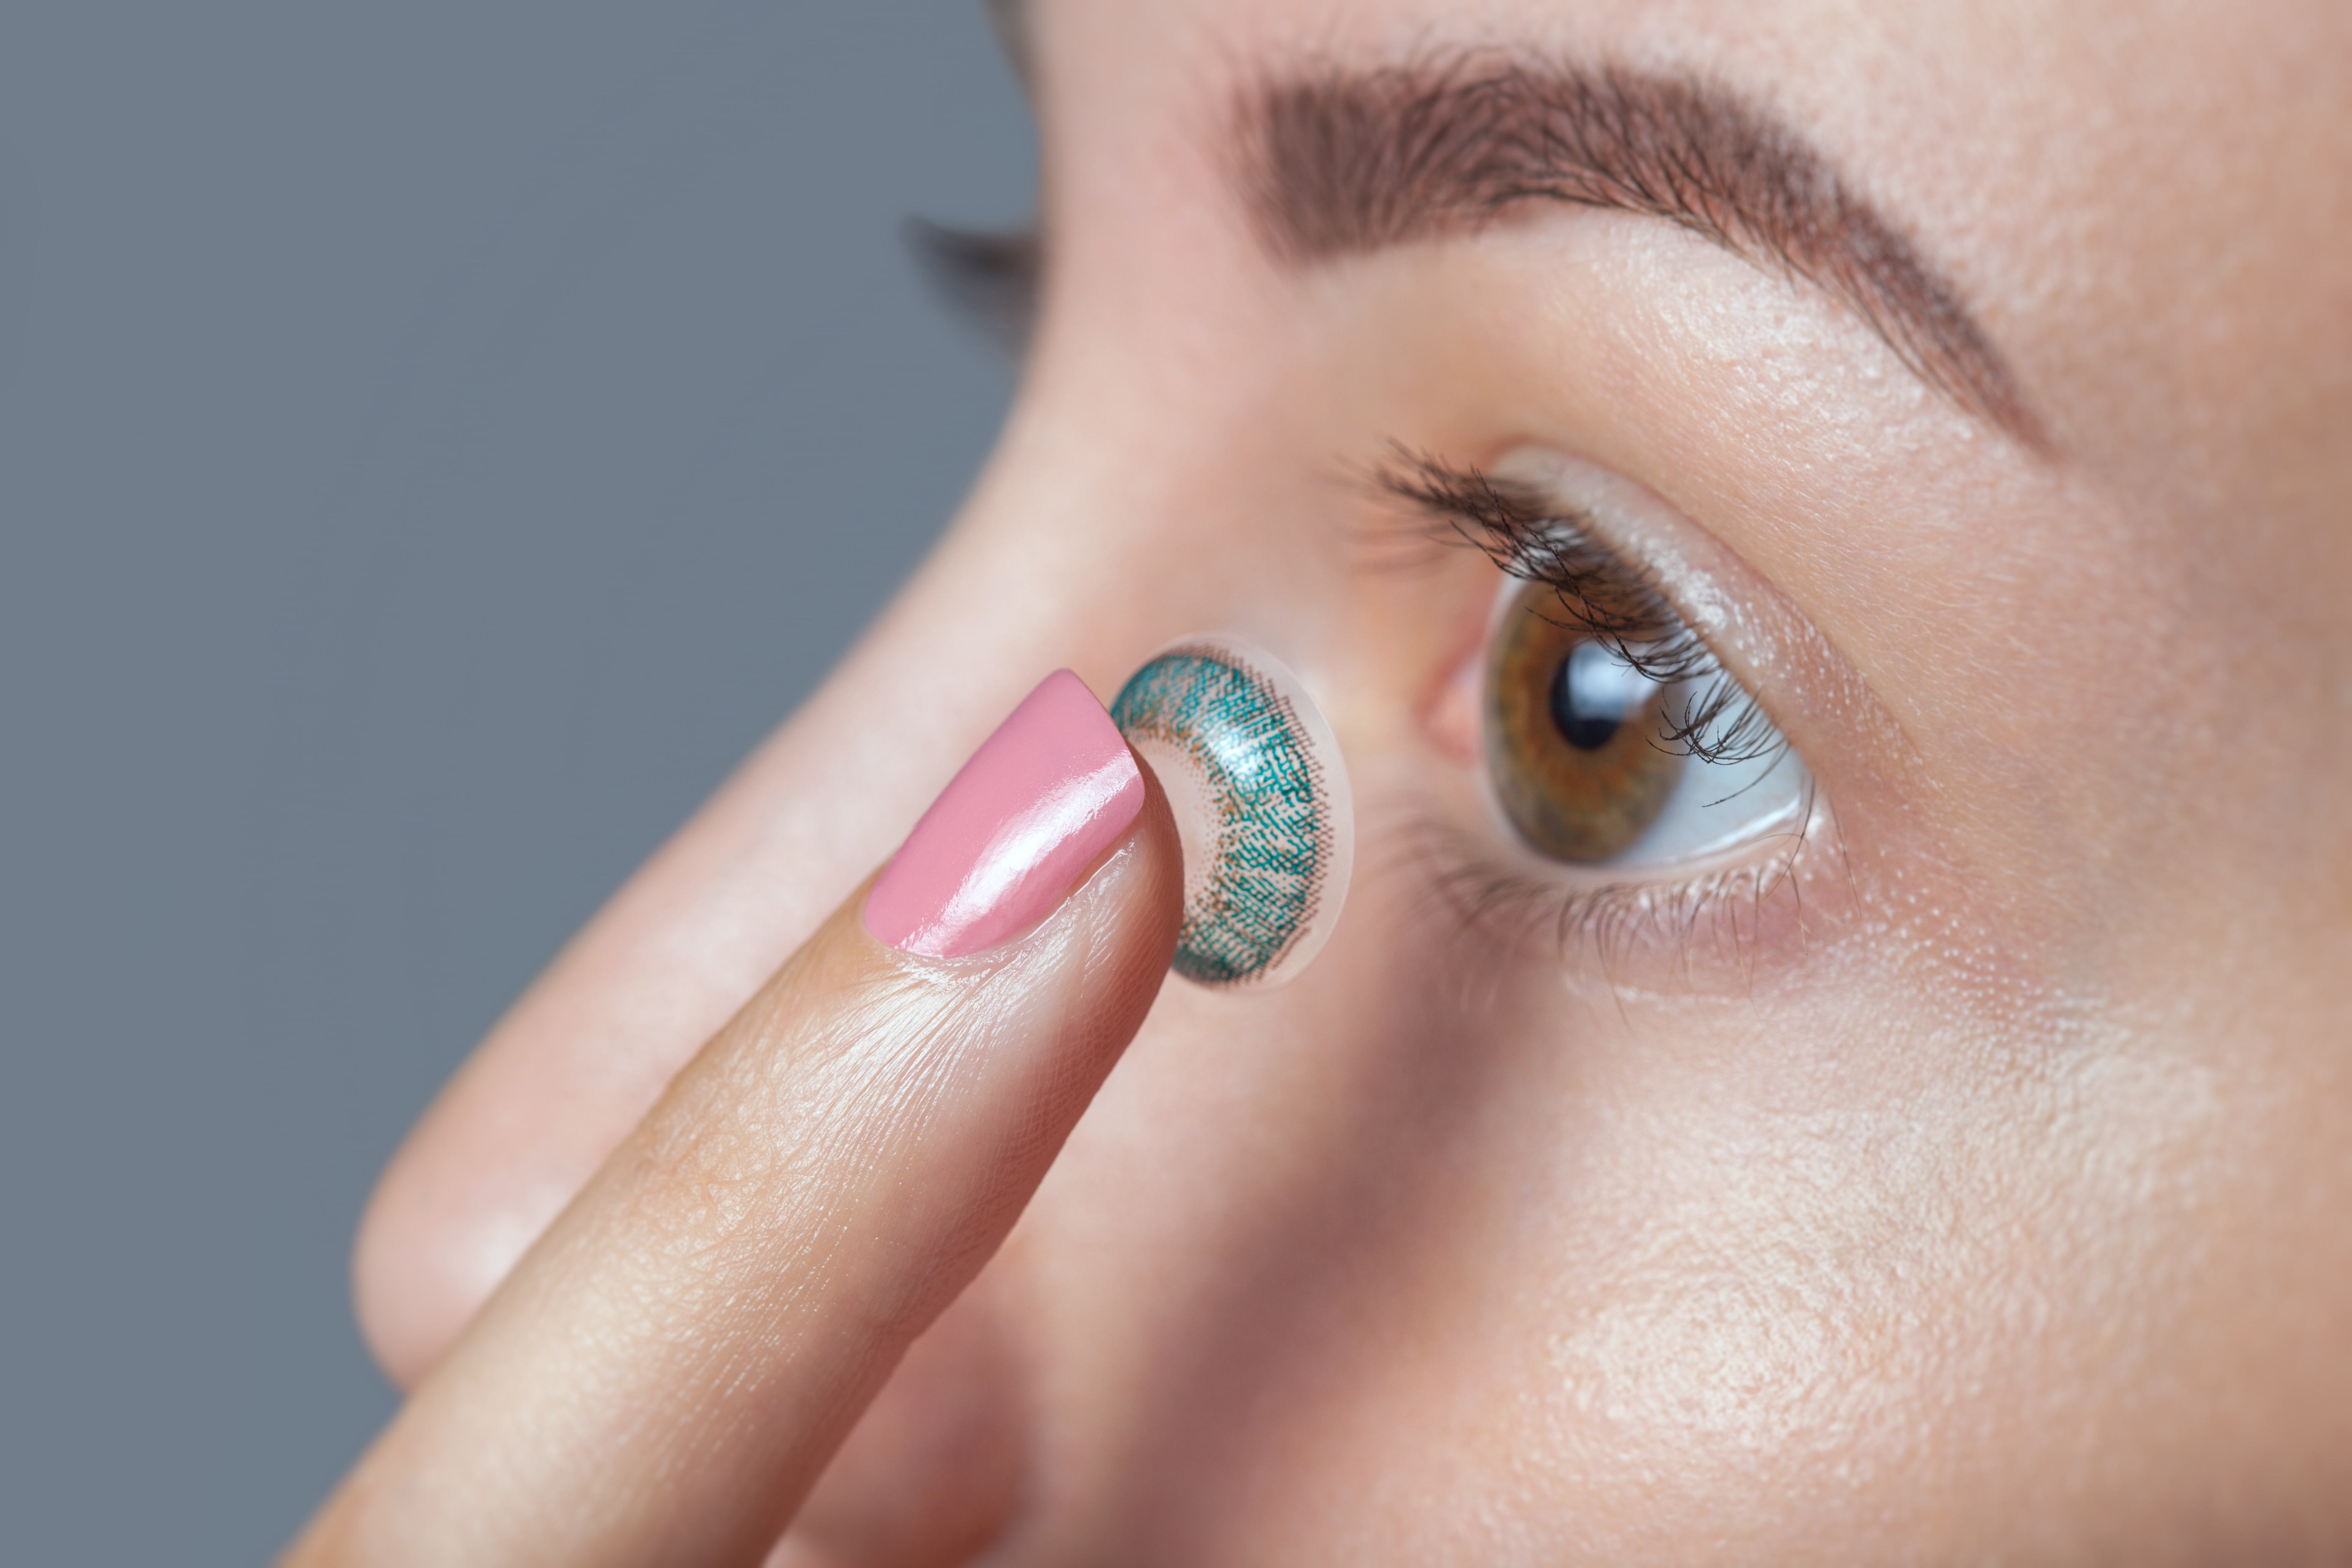 Blue vs. Green Colored Contact Lenses: Which One Is Better Option For You, by Elklens